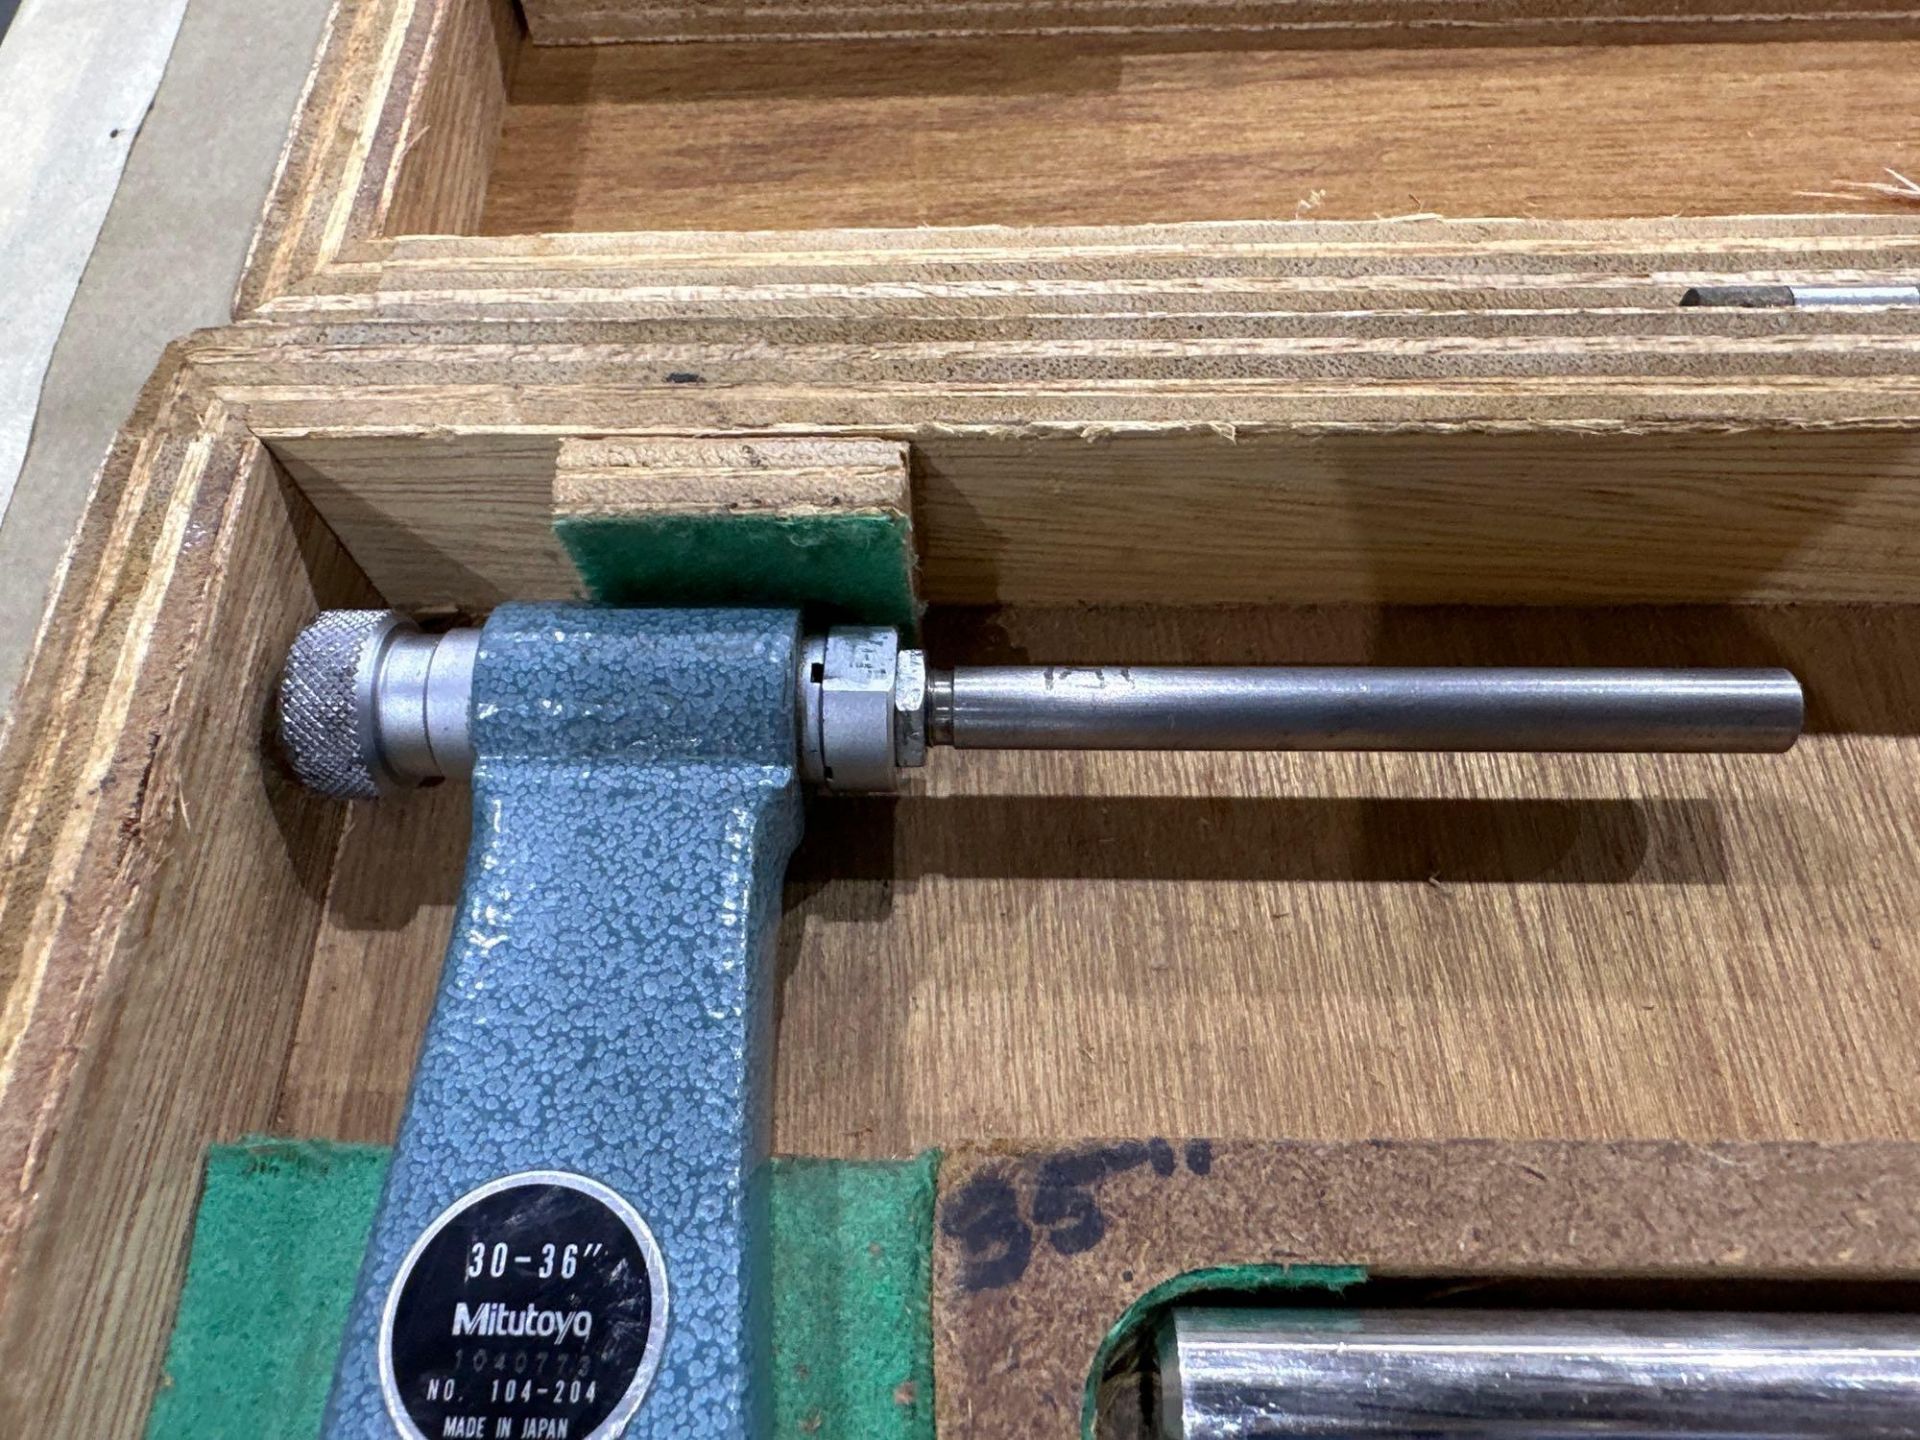 Mitutoyo OD Micrometer Set No. 104-204, Range 30" - 36" with interchangeable anvils, in wood case - Image 5 of 9